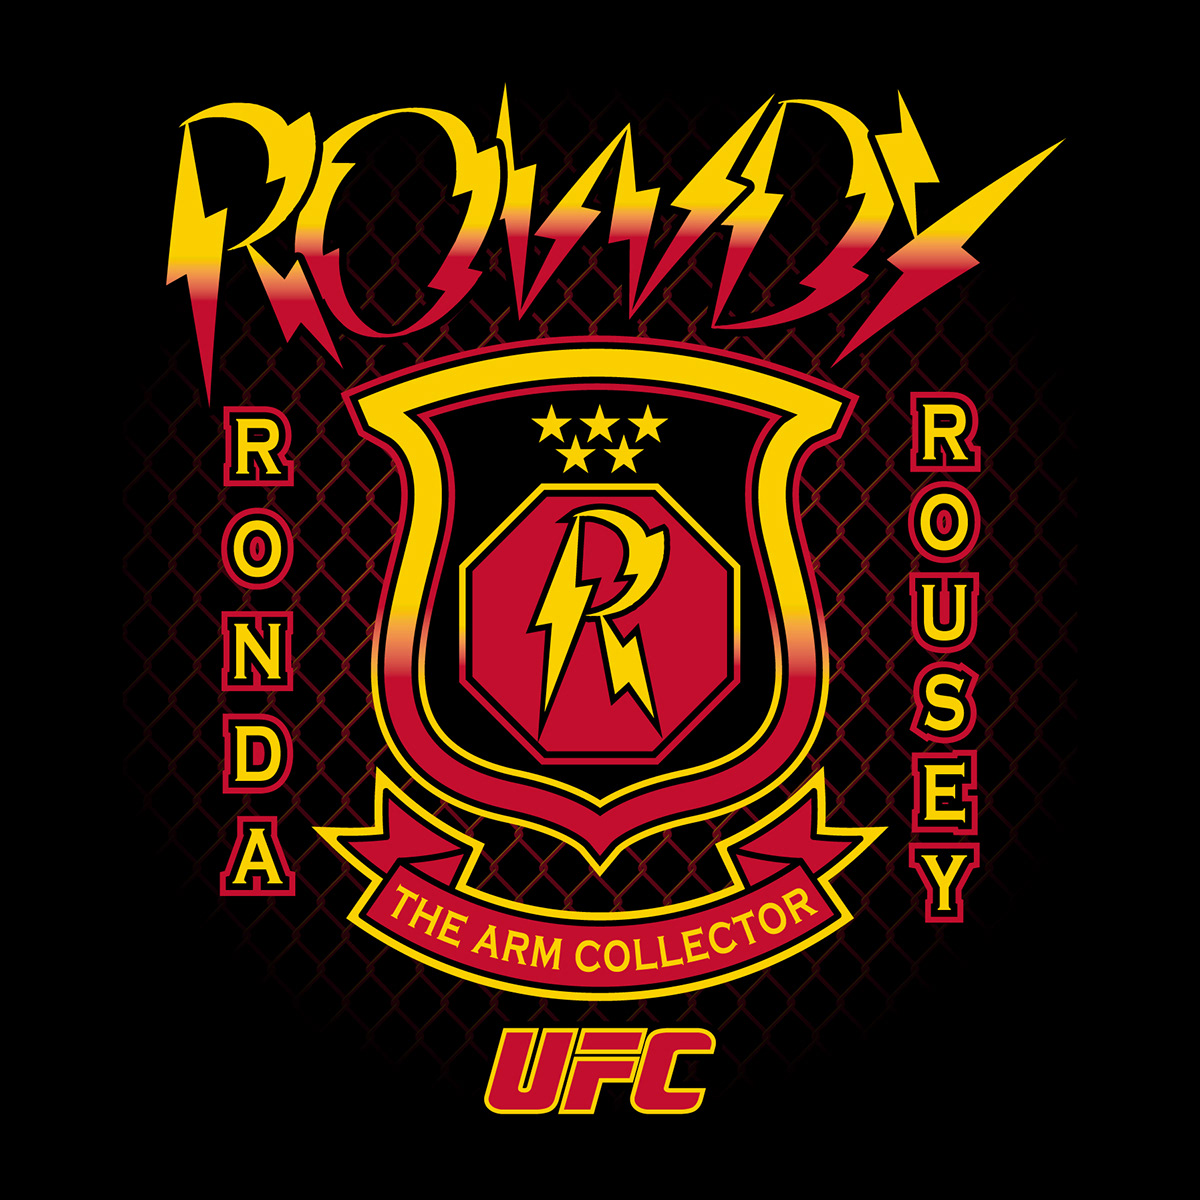 MMA UFC Rowdy Ronda Rowsey Walk-out Tee Octagon The Arm Collector MMA T-shirts t-shirt http://rondarousey.net ronda rousey http://www.ufcstore.com